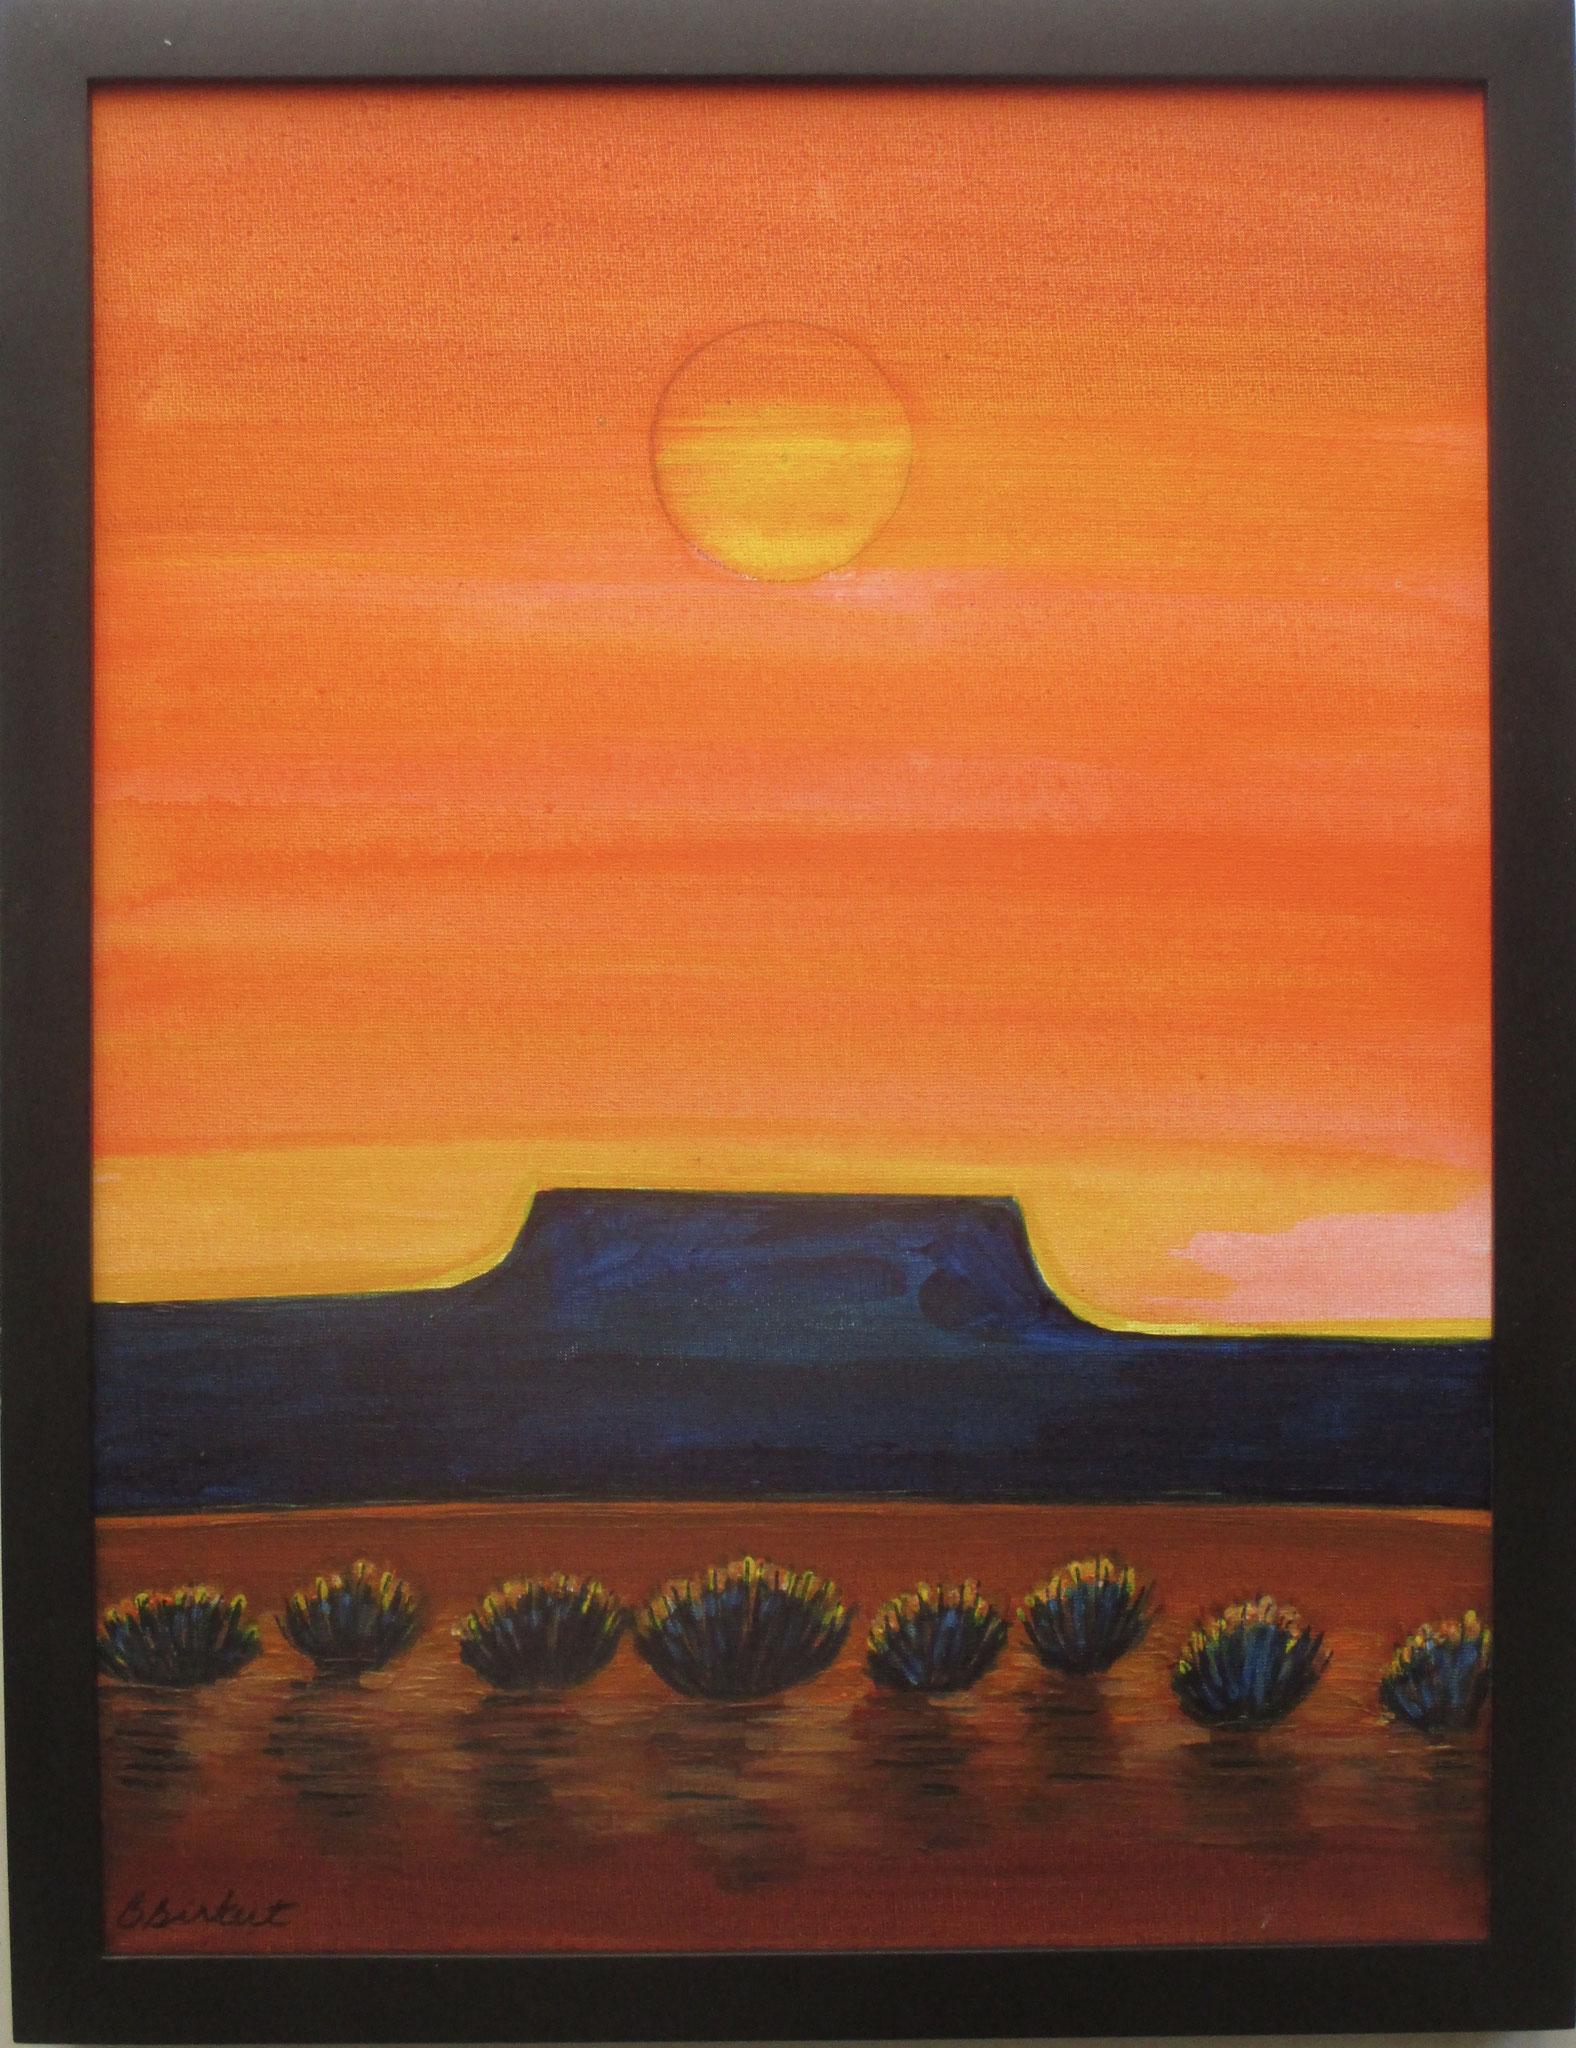 Coral Sunset, acrylic on canvas, 12 x 16 